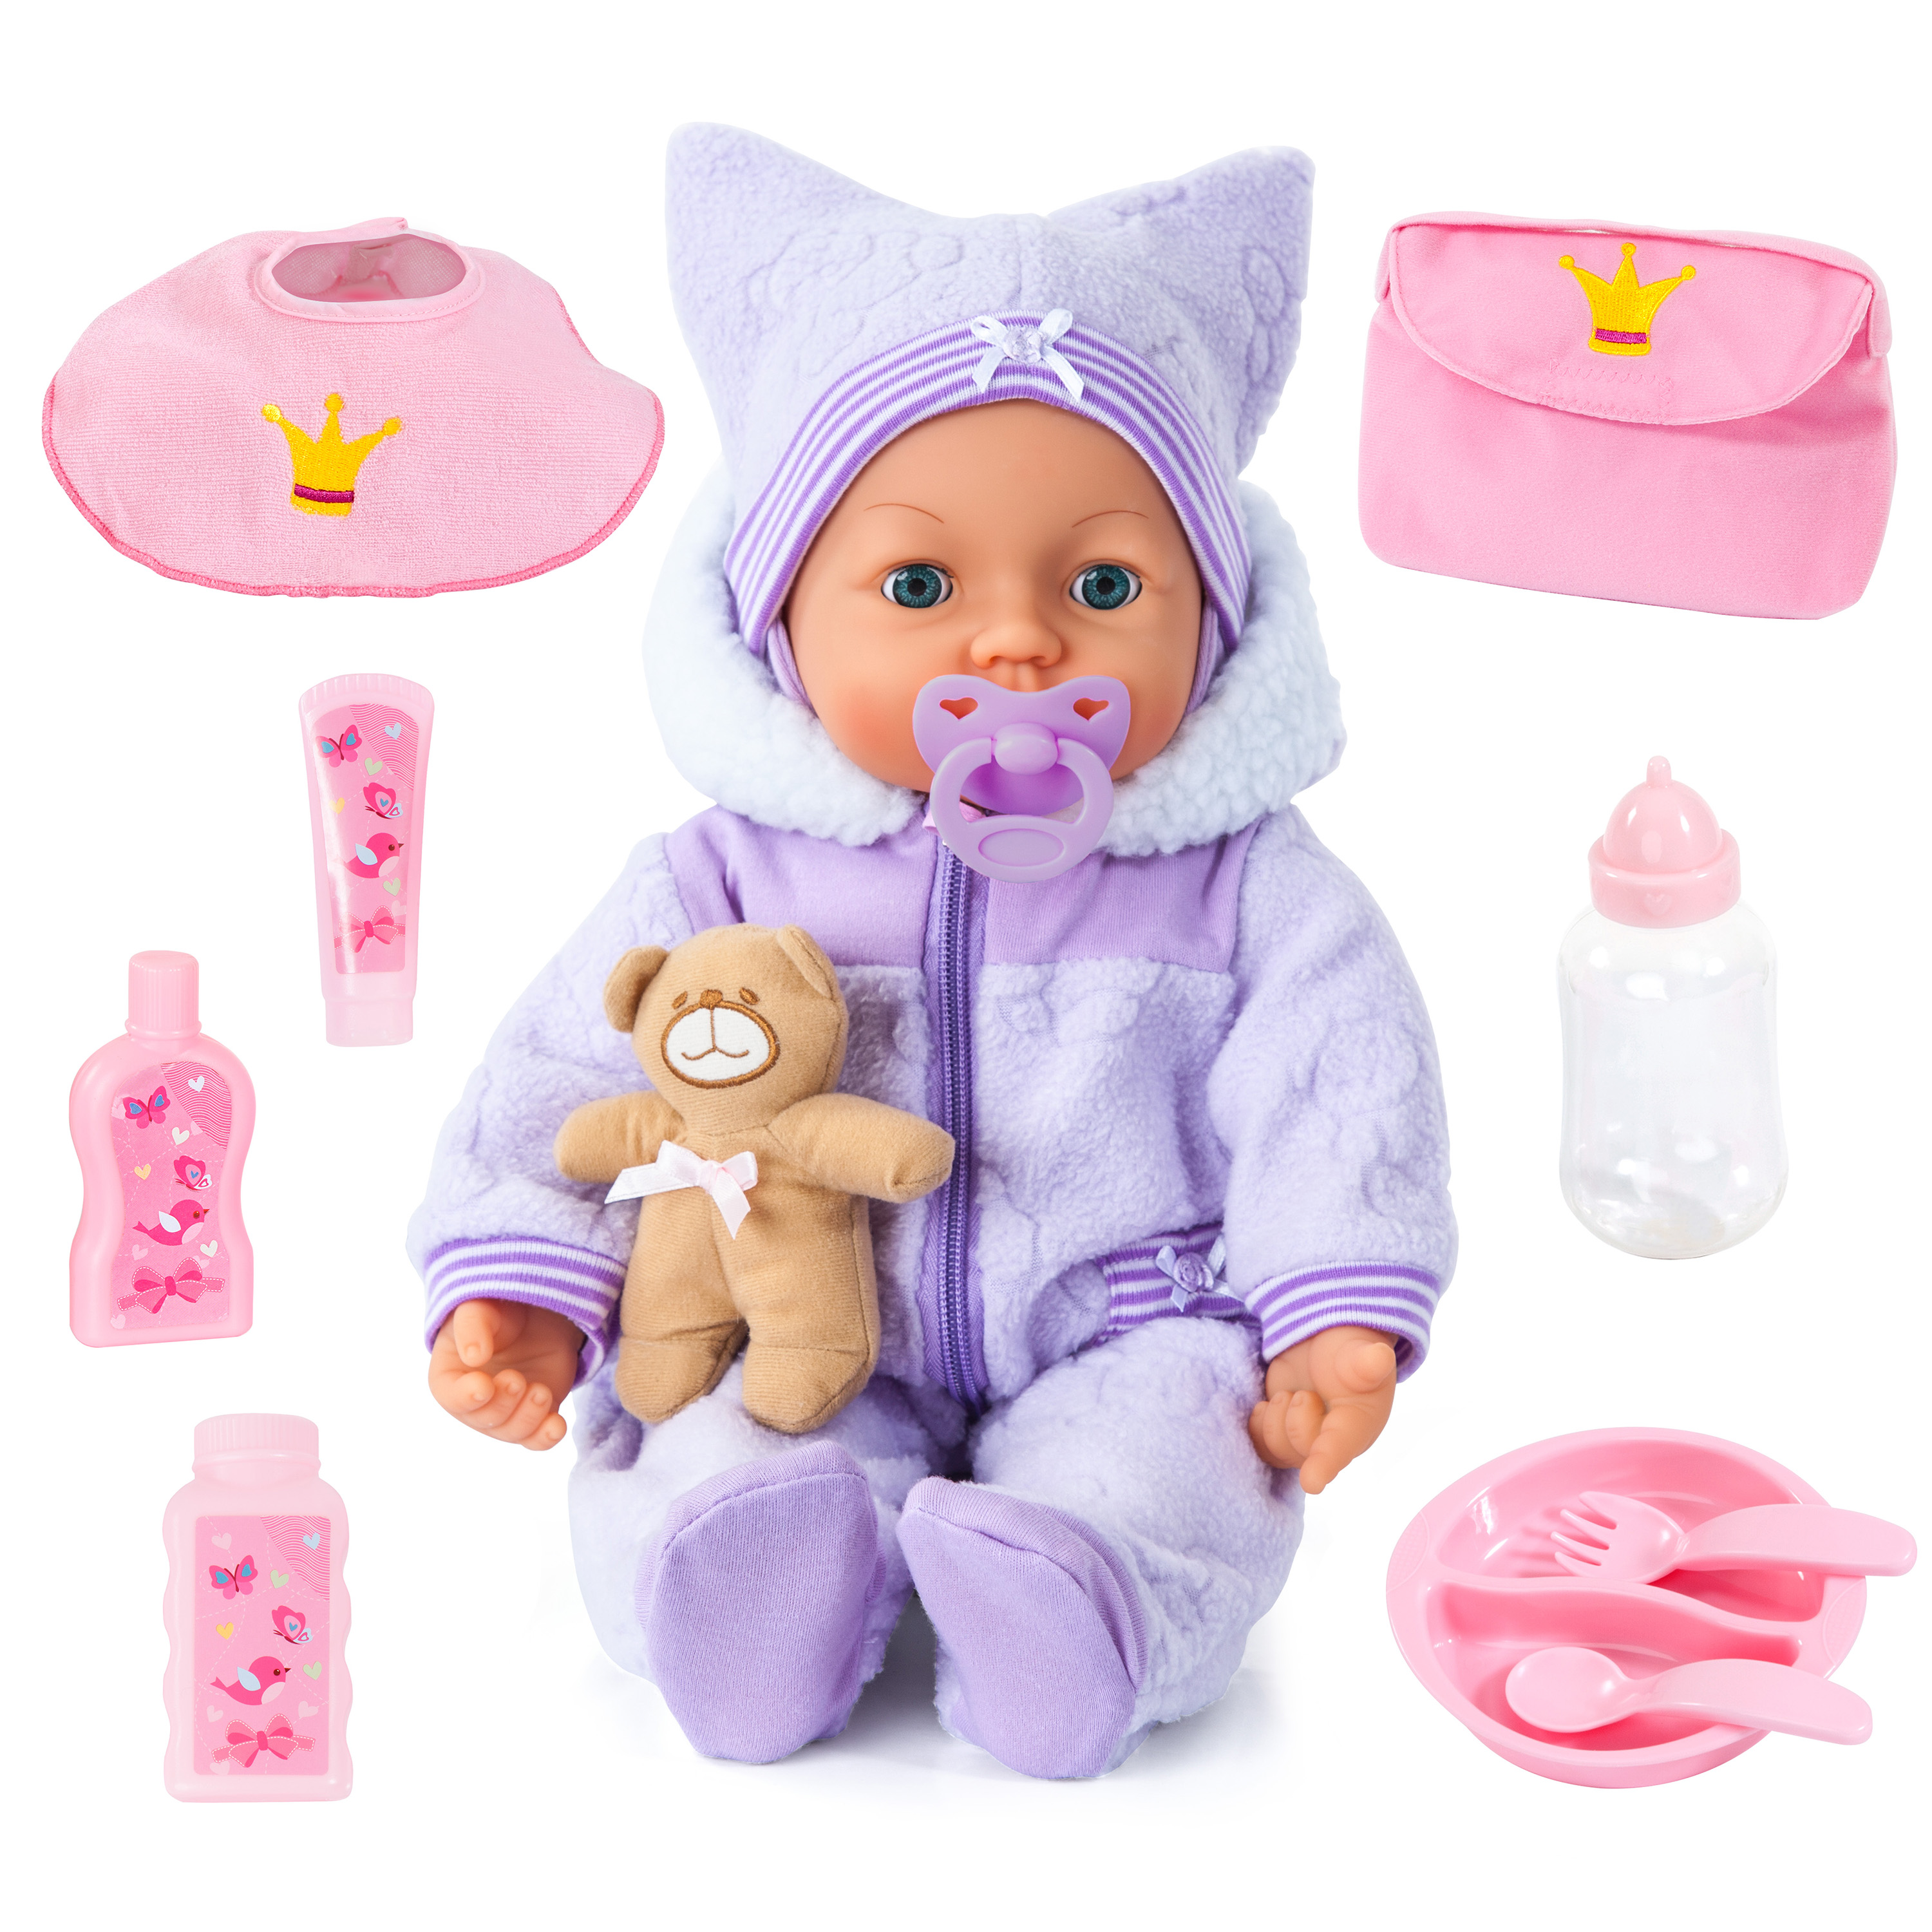 Bayer Design Piccolina Magic Eyes 18" Baby Doll for Children Age 3 Years and up - image 1 of 9